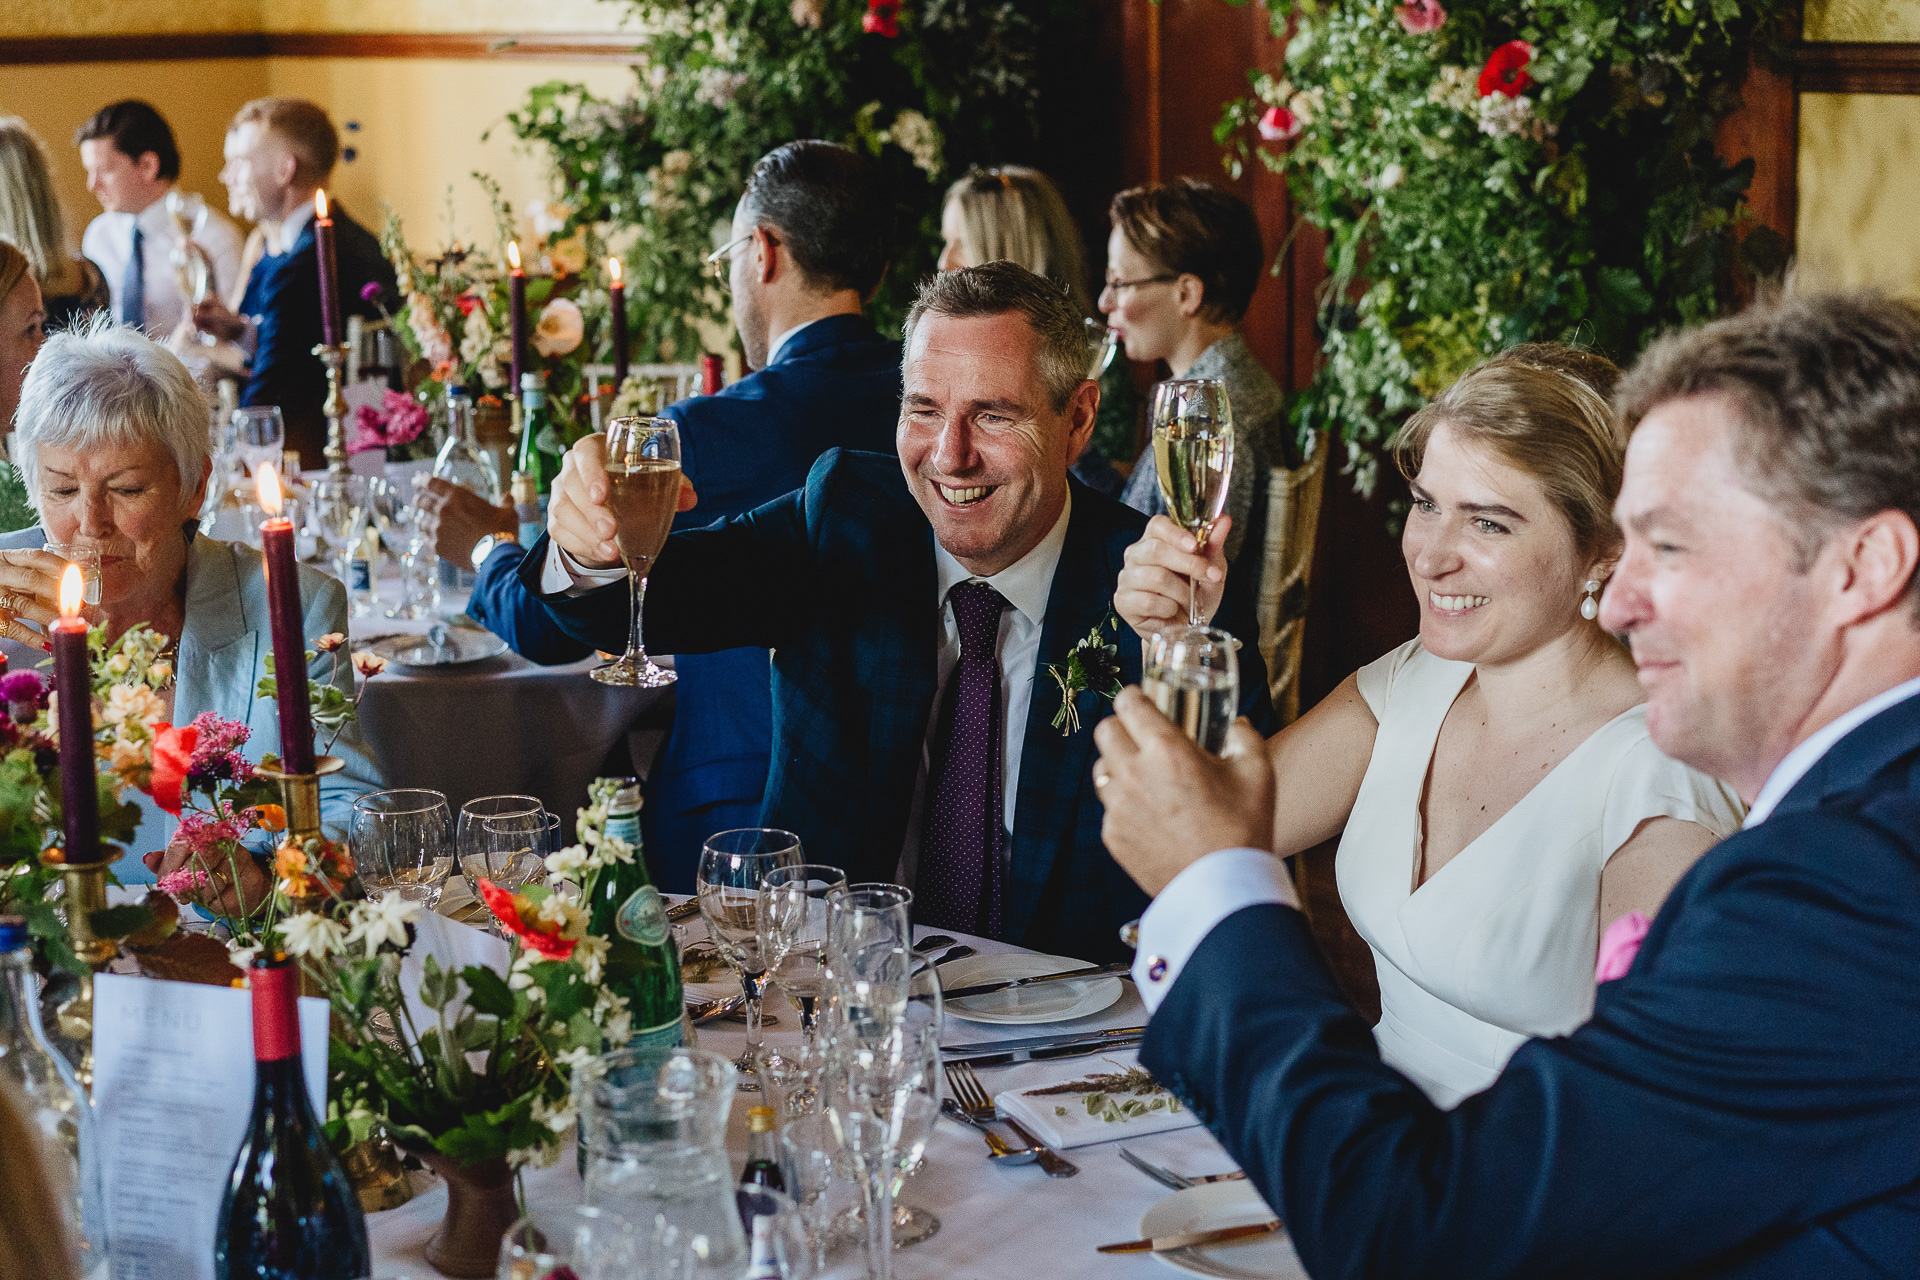 Bride and groom raising glasses during wedding toasts